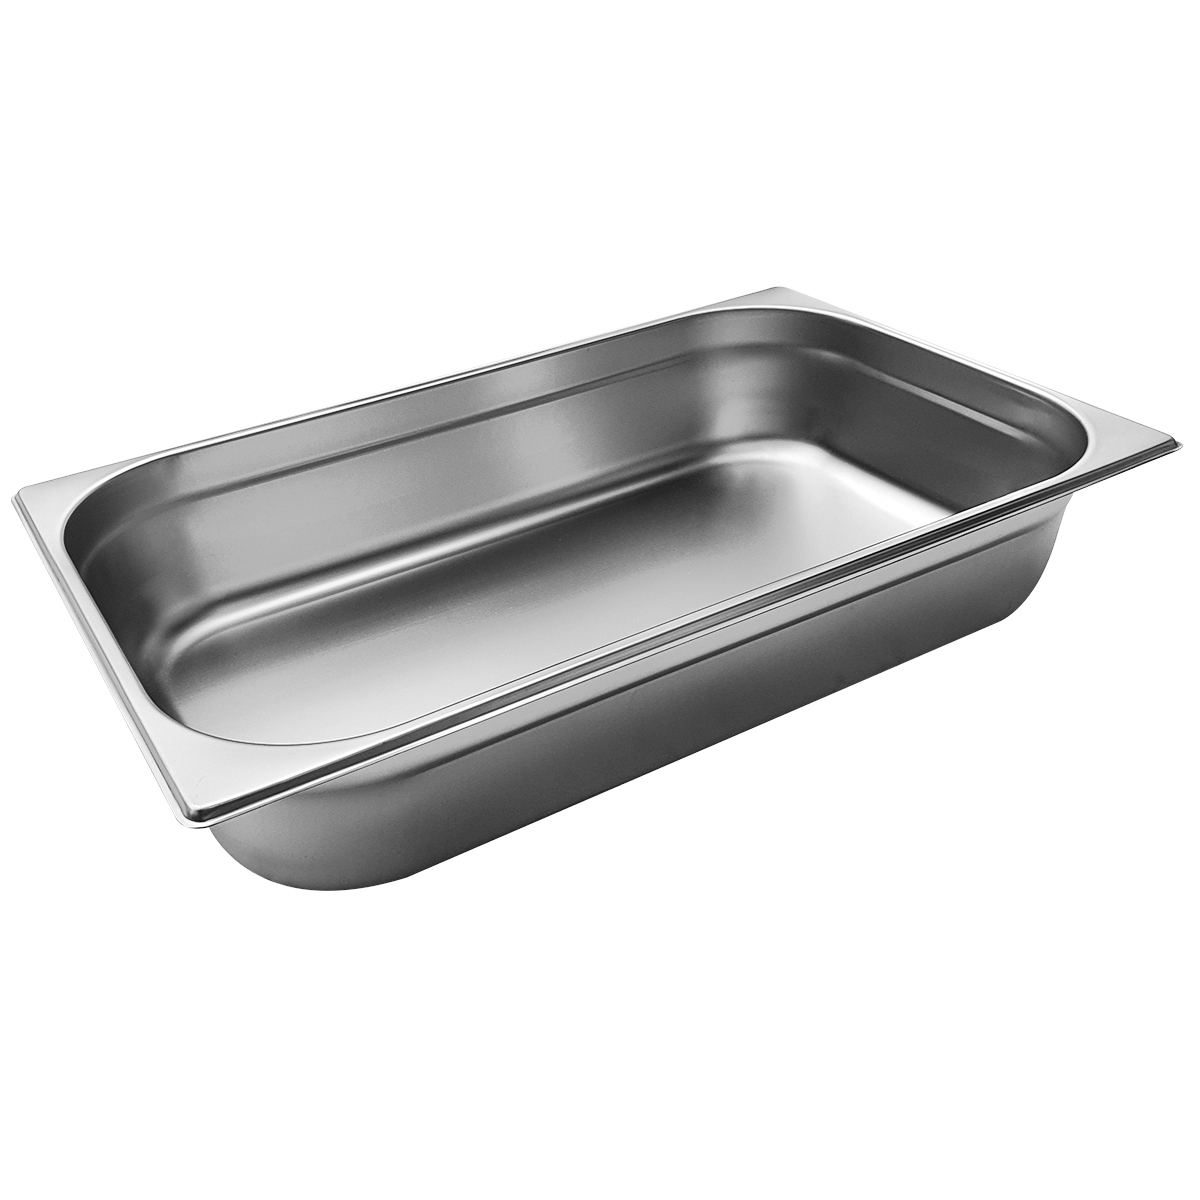 Cater-Cook 1/1 Stainless Steel Gastronorm Container 100mm Deep - CK4005